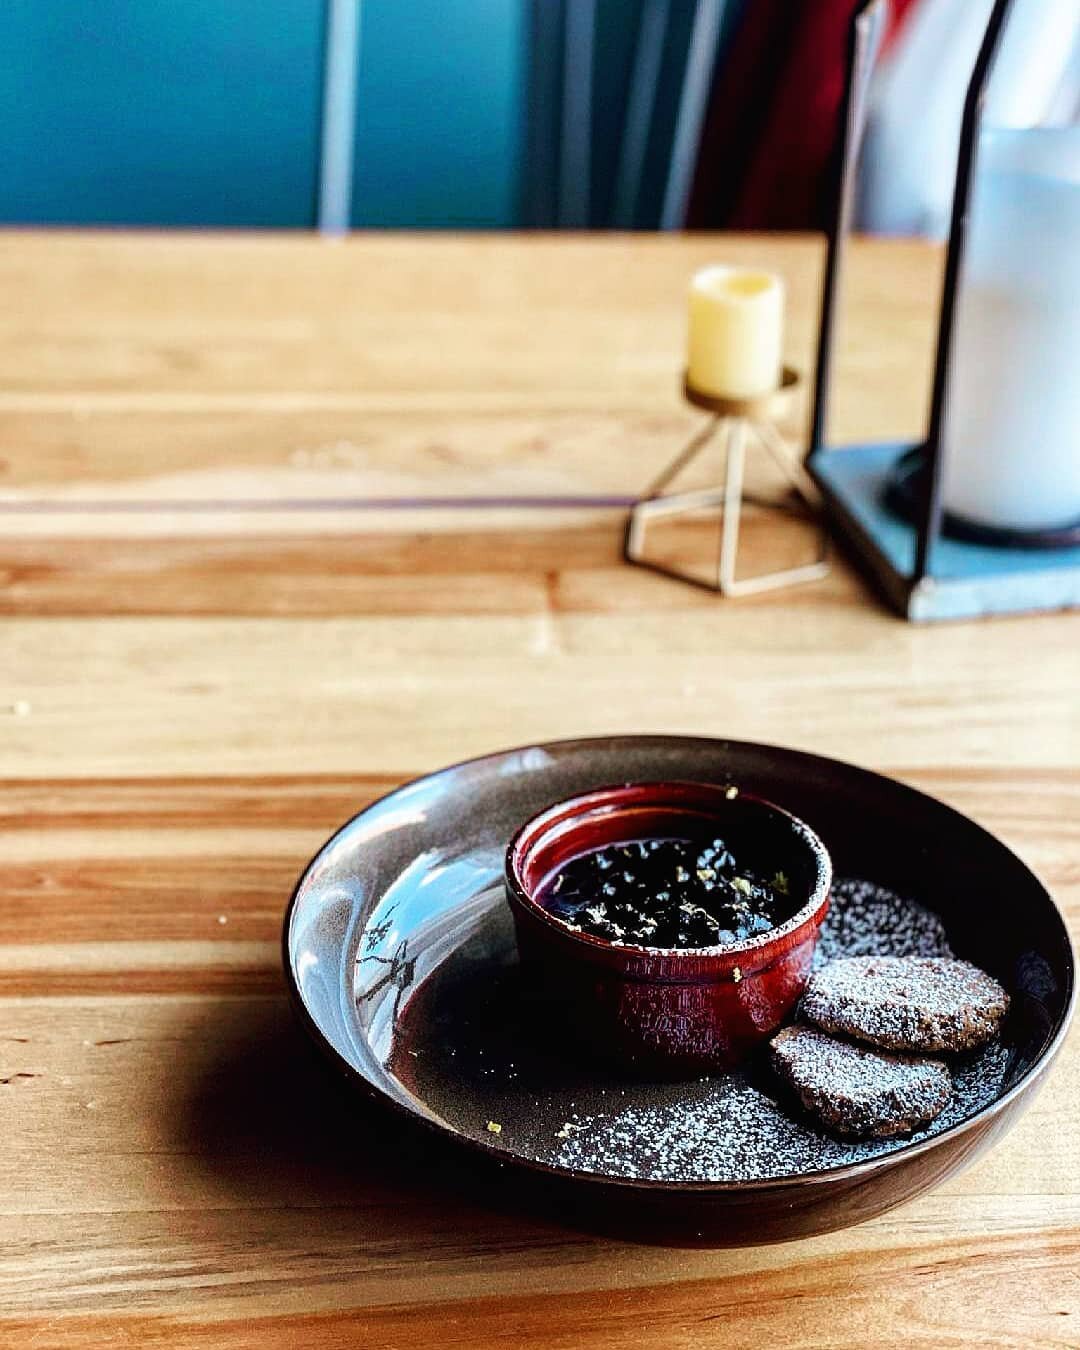 Wild blueberry panna cotta with lemon curd, mezcal blueberry compote, and poppy and rye cookies. 🤤
.
.
.
.
.
.
.
.
.
.
.
.
#eatlocal #farmtotable #eatmaine #travelmaine #maine #mainedining #watervillemaine #fairfieldmaine #foodie #foodpics #chefsofi